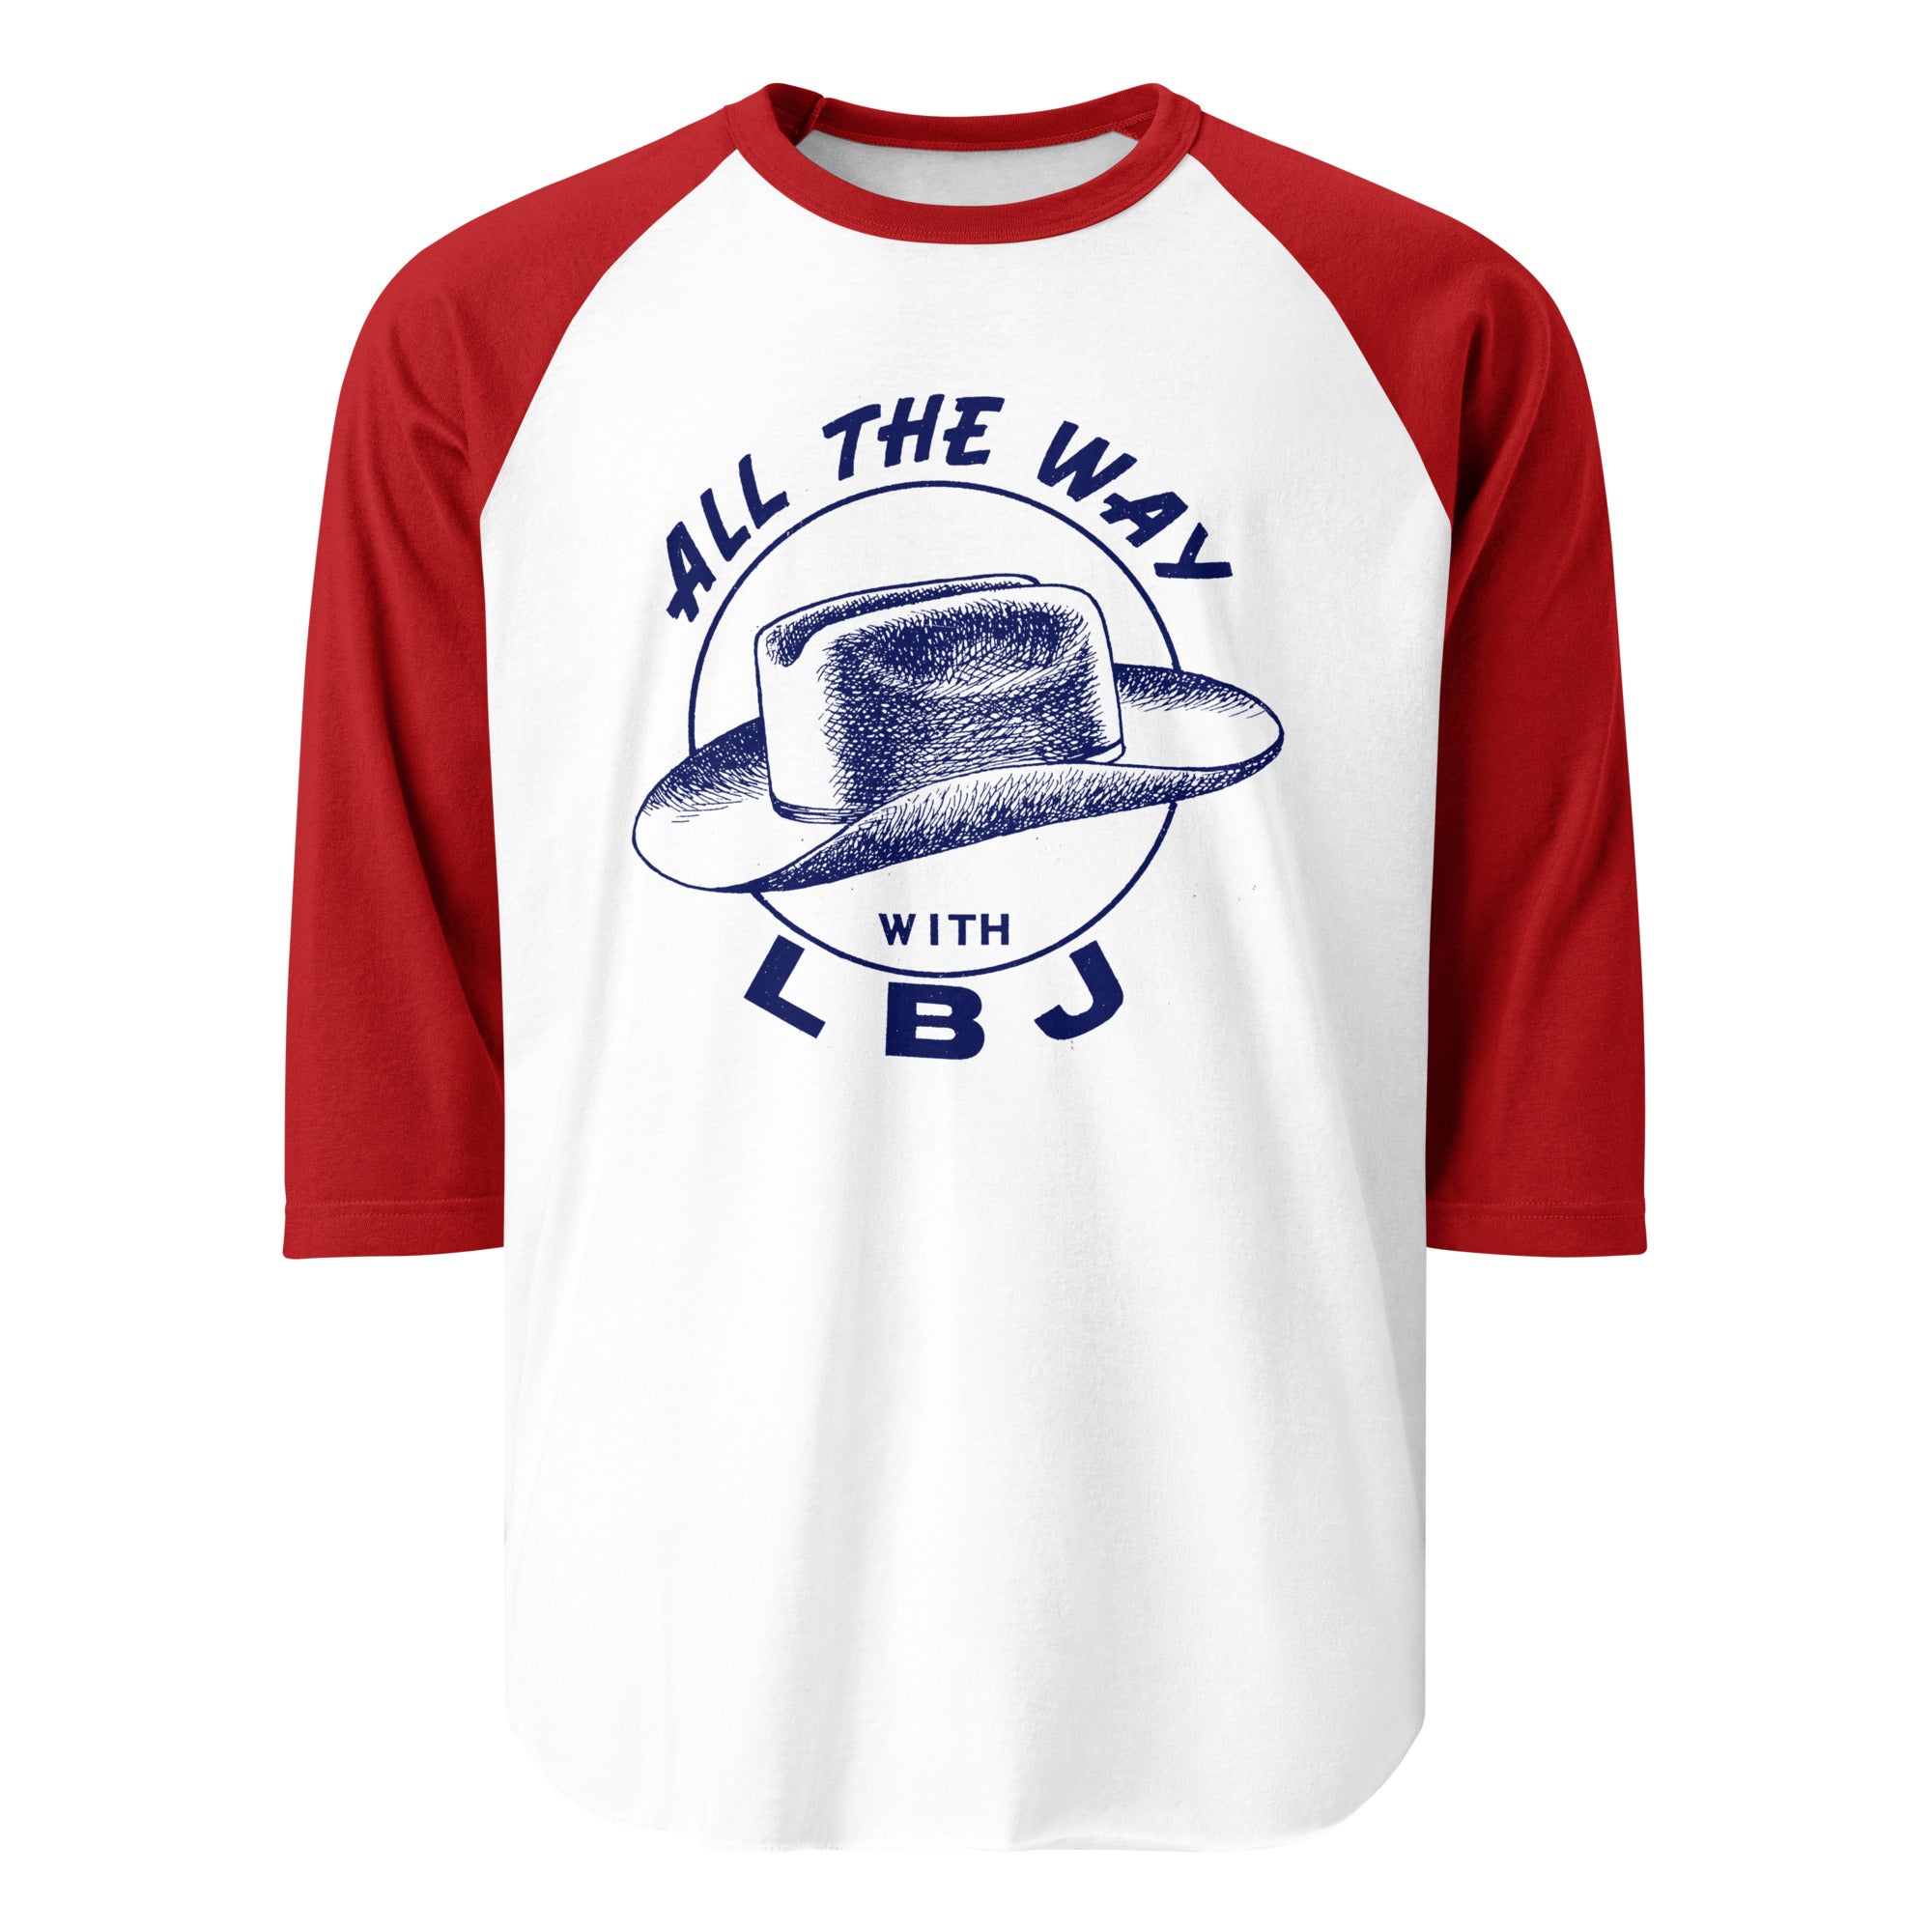 All the Way with LBJ 1964 Reproduction Campaign 3/4 sleeve raglan shirt